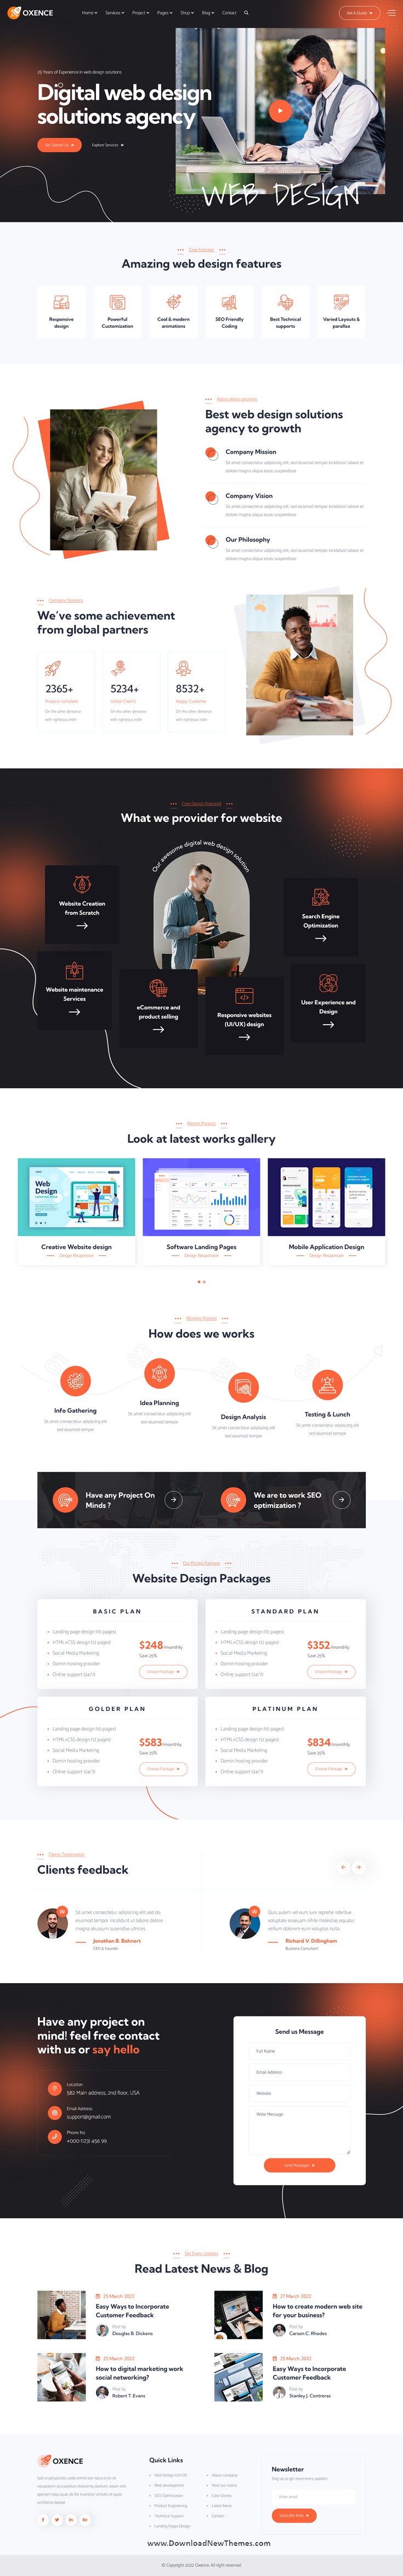 Oxence - Web Design Agency React NextJs Template Review